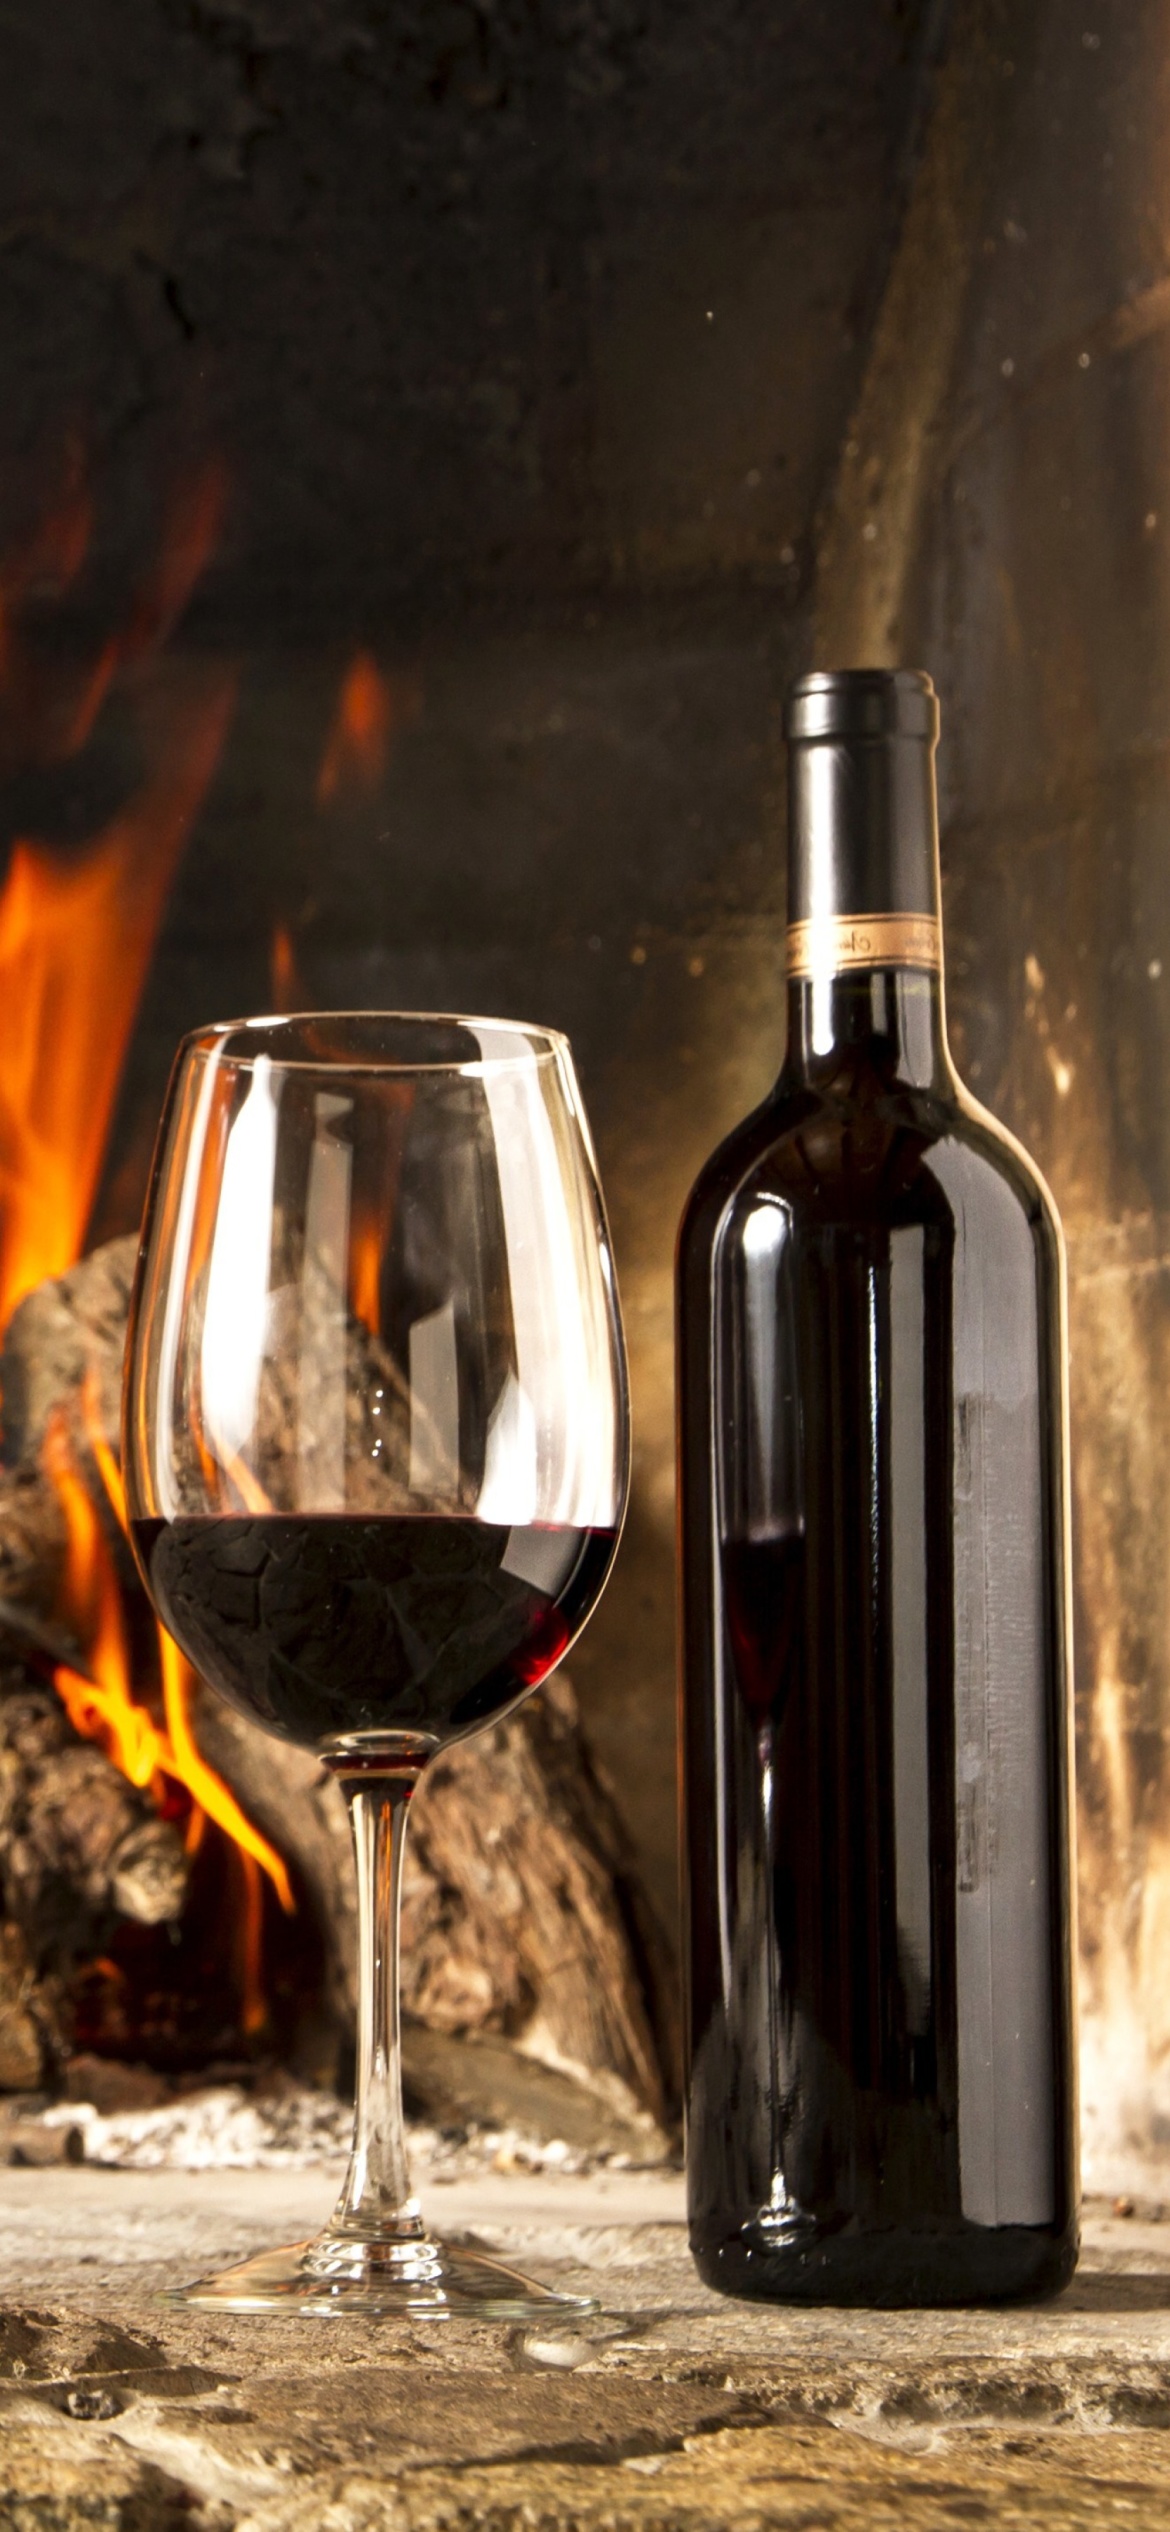 Das Wine and fireplace Wallpaper 1170x2532